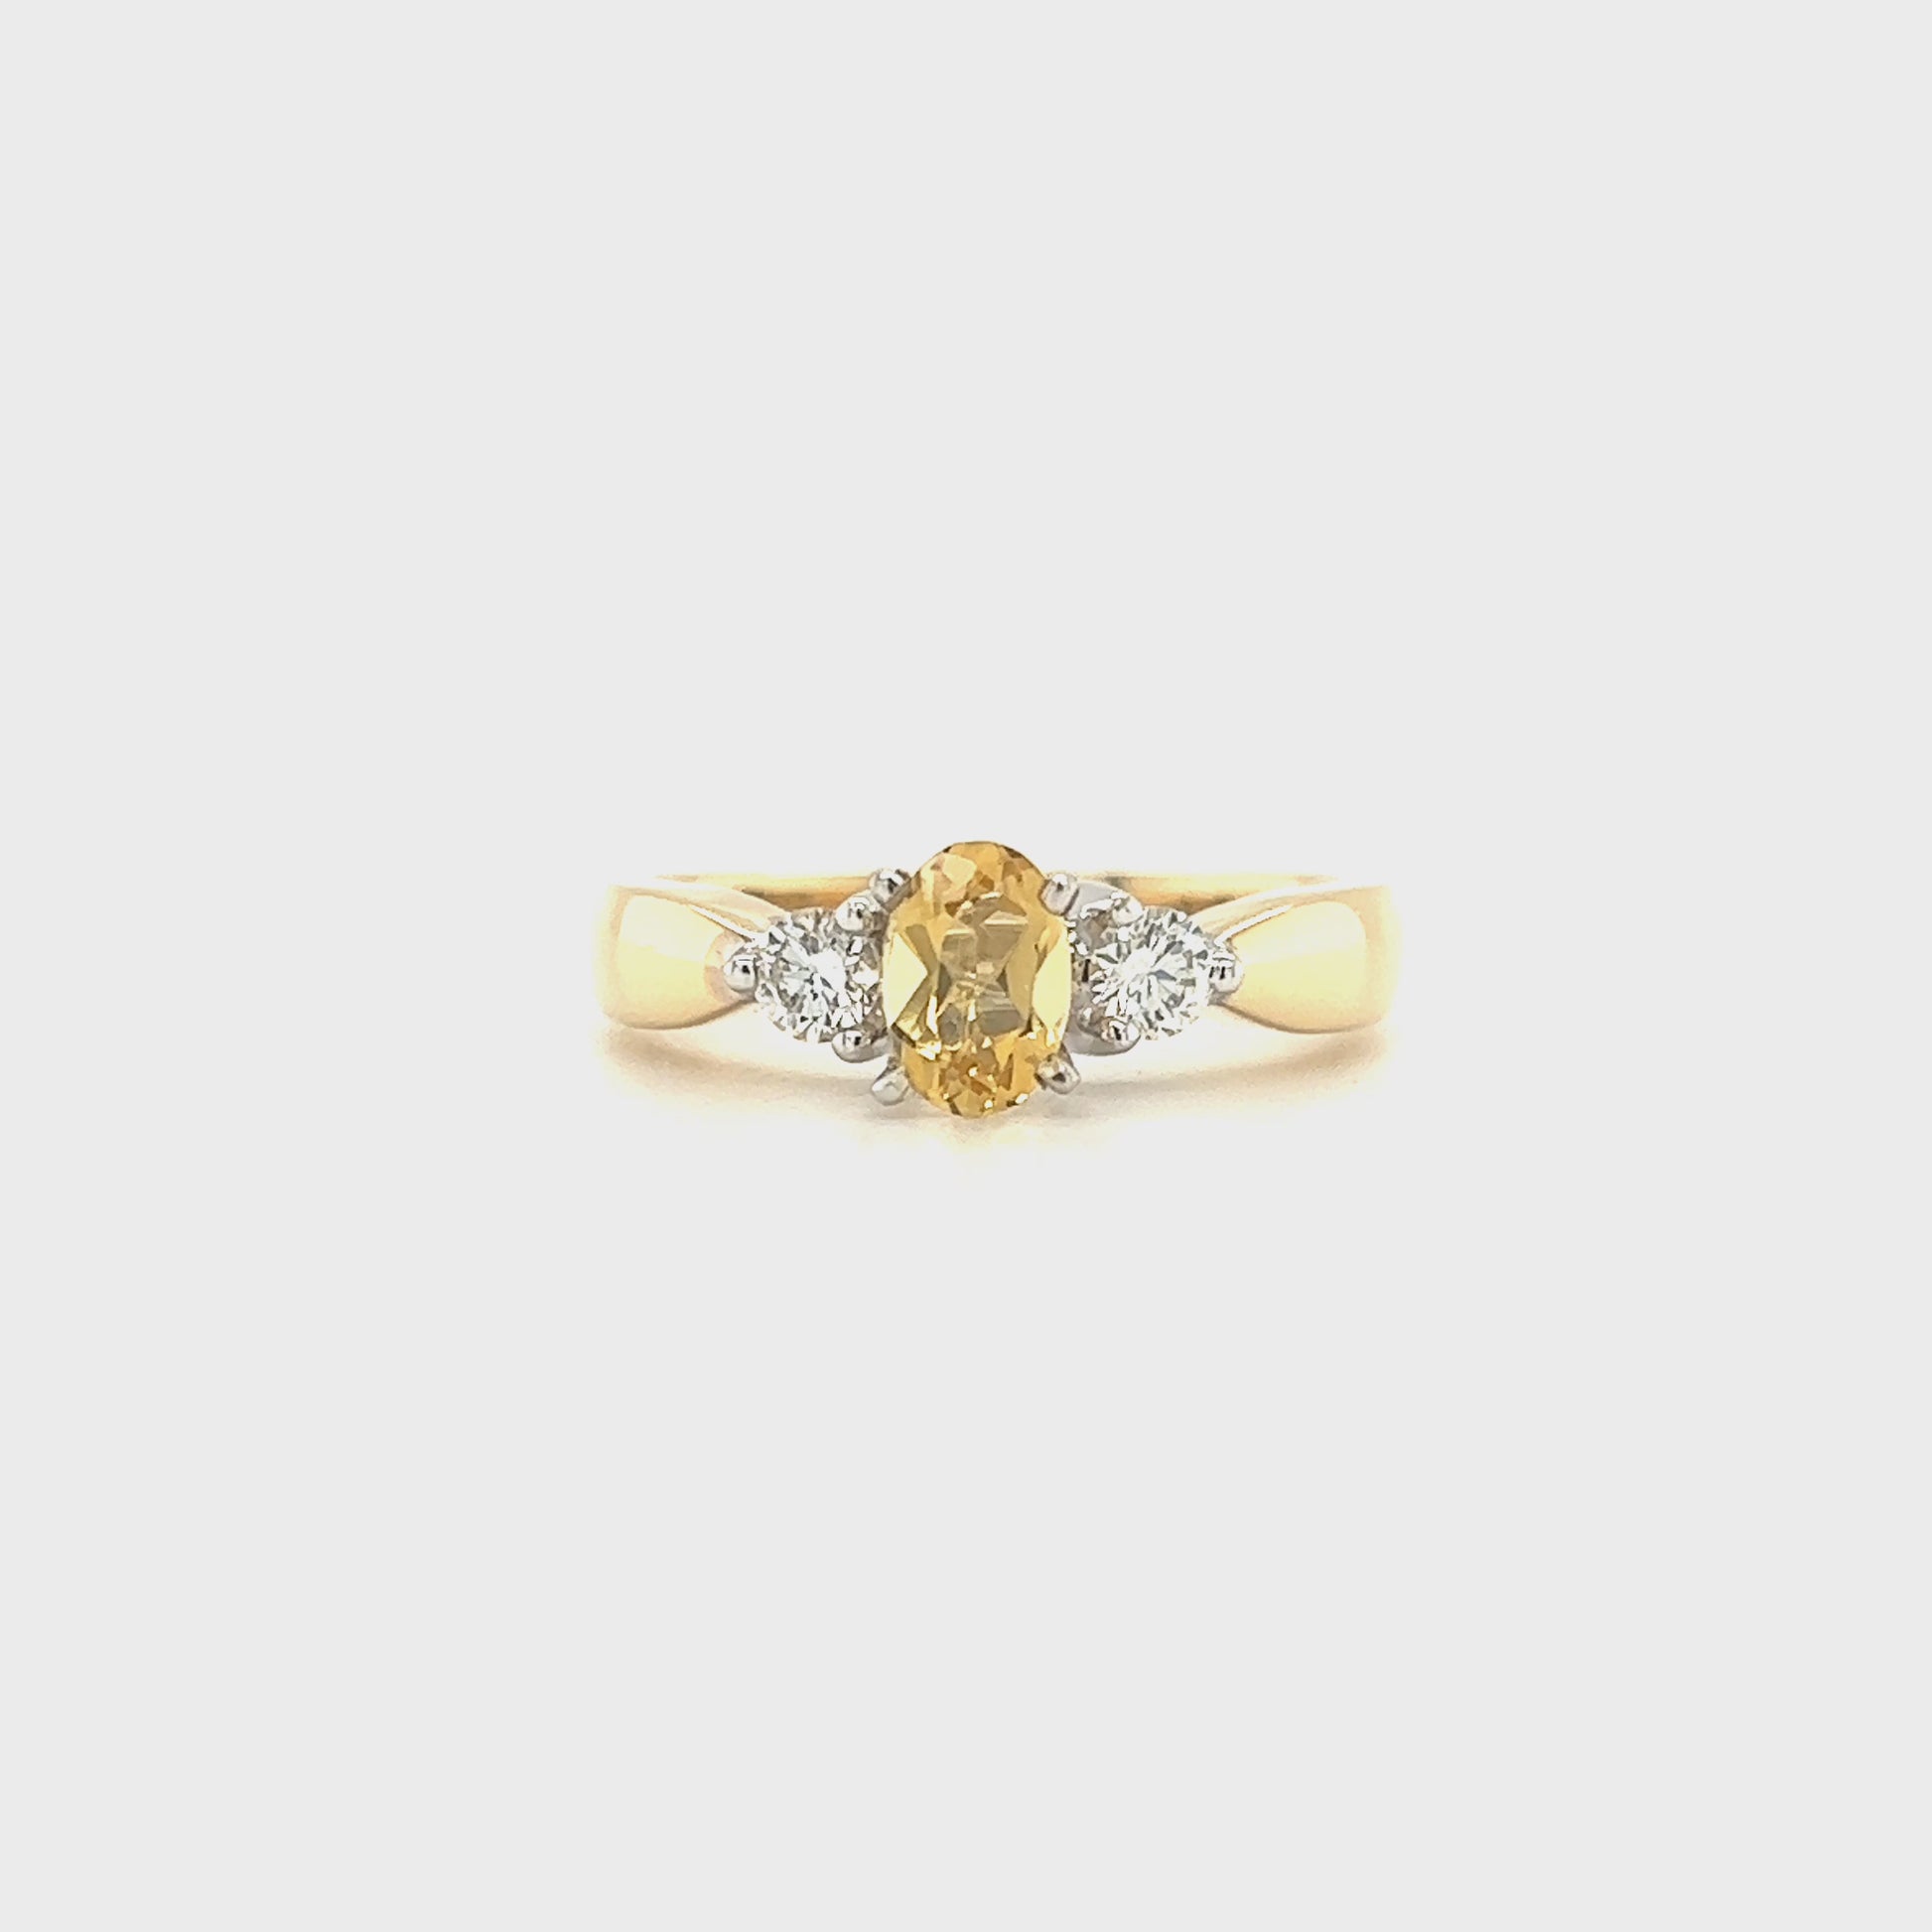 Precious Yellow Topaz Ring with Two Side Diamonds in 14K Yellow Gold Long Video